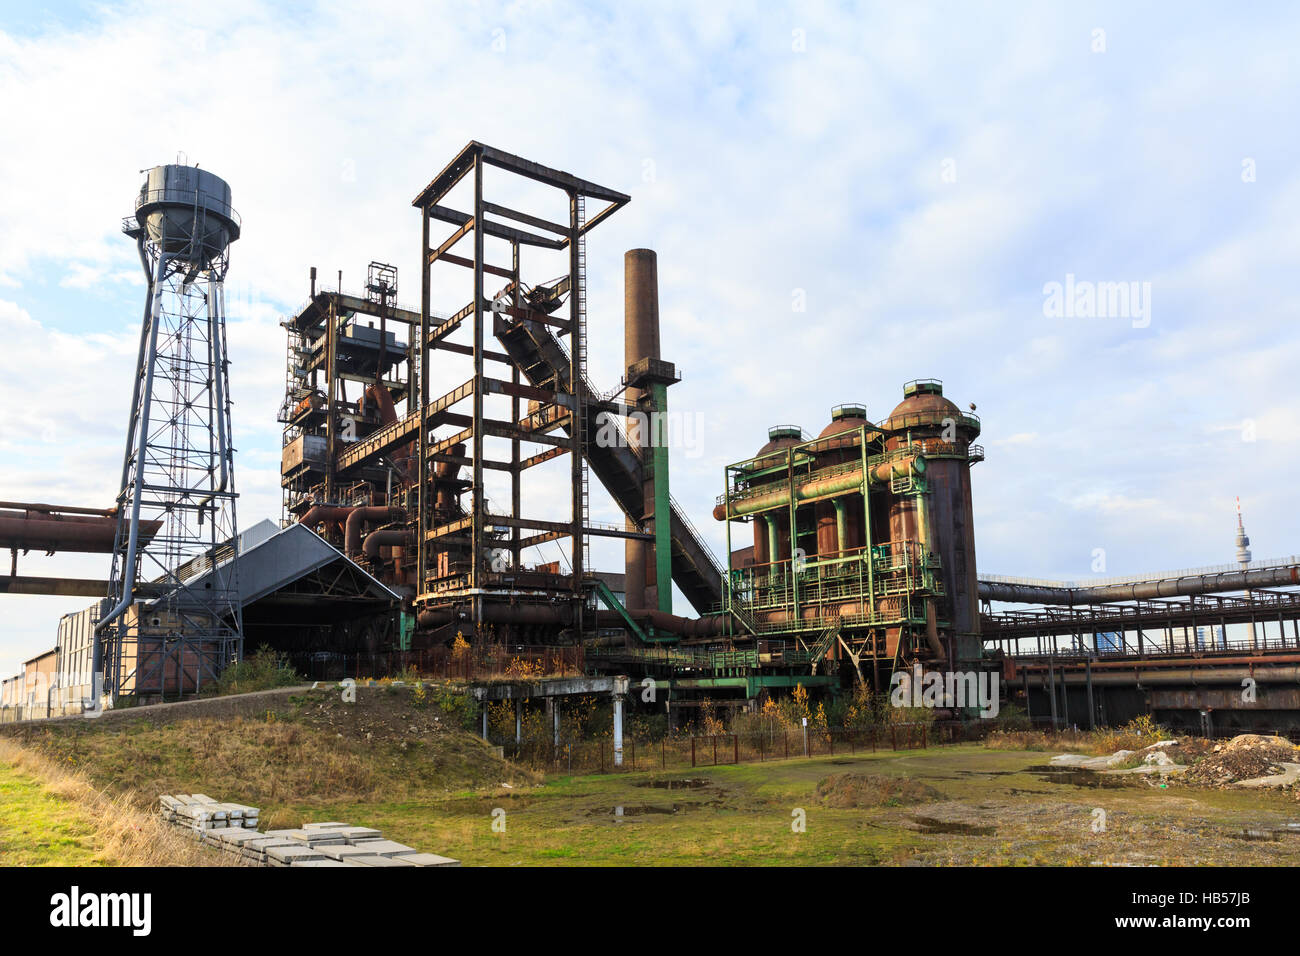 The disused Phoenix West steelworks and blast furnace ironworks, formerly part of ThyssenKrupp Steel  in Dortmund, Germany Stock Photo